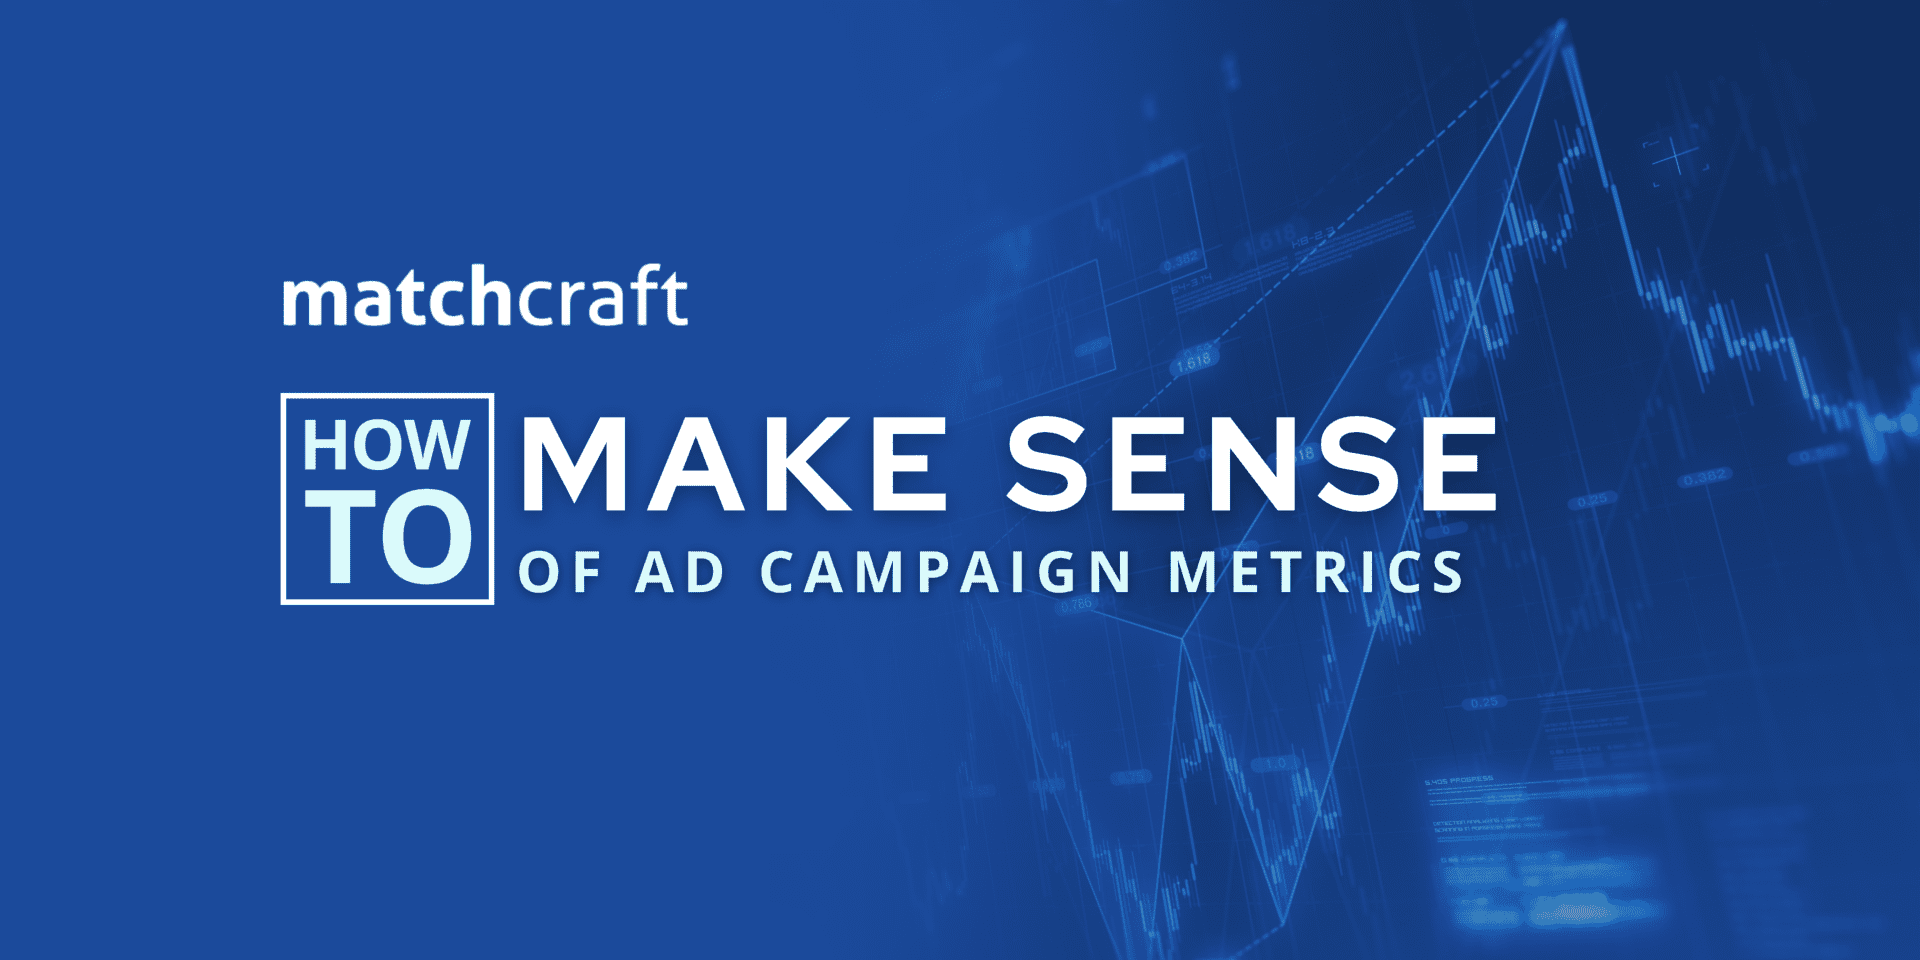 Graphic showing the MatchCraft logo and the text “How to Make Sense of Metrics for Ad Campaigns”